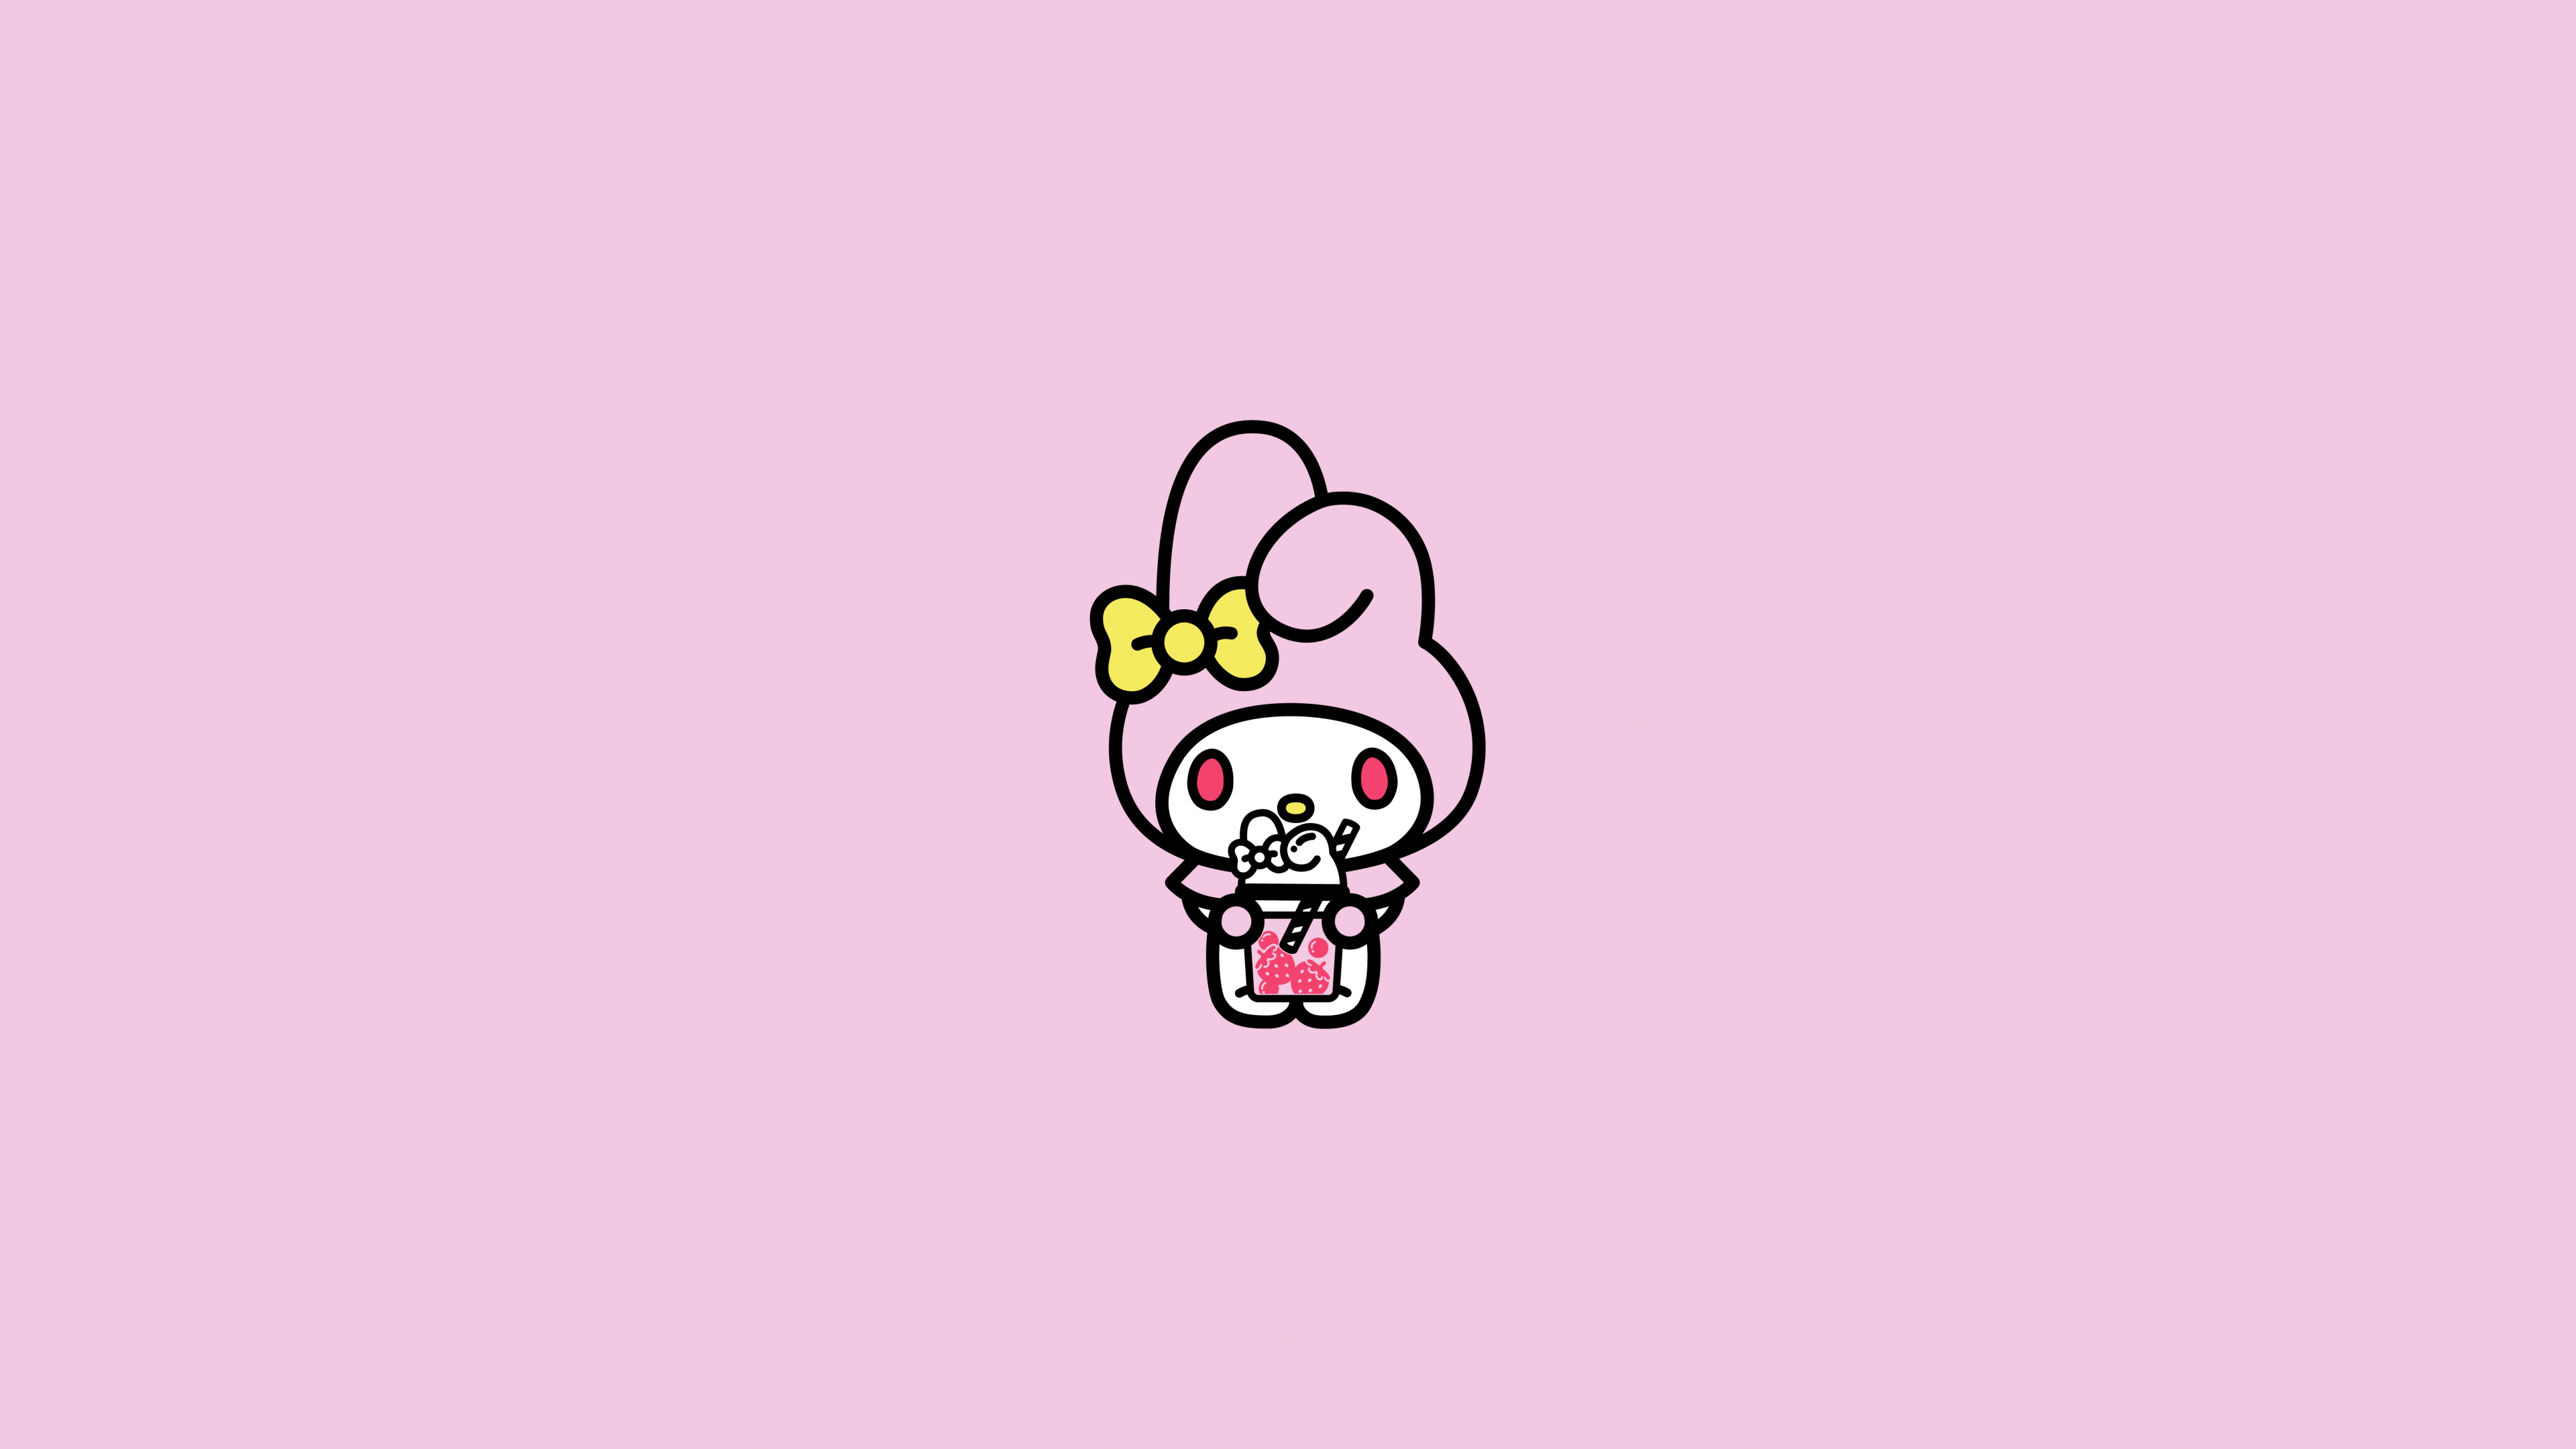 HD my melody wallpapers